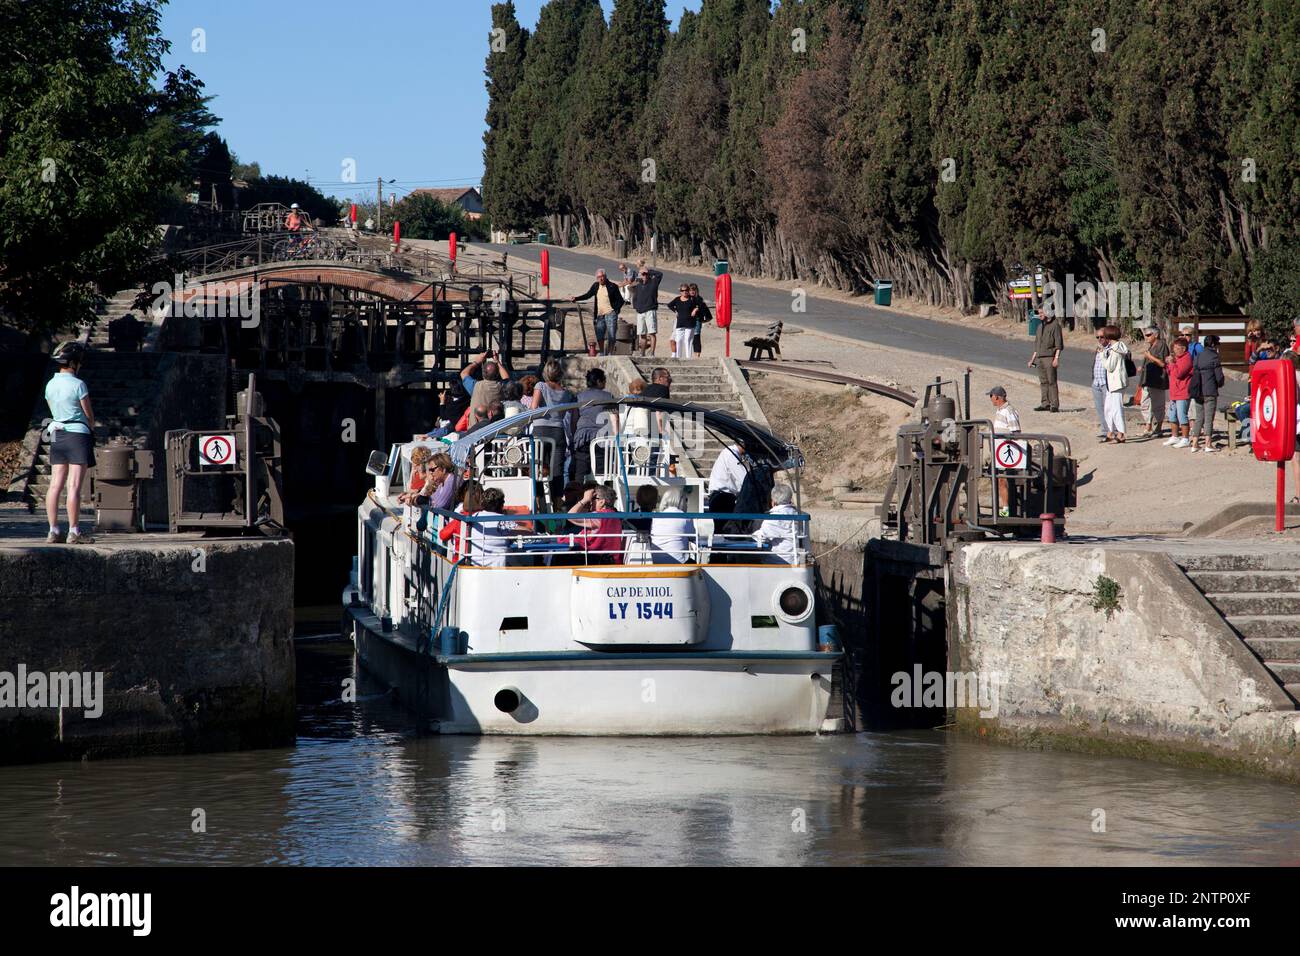 France, Beziers, canal barges passing through the famous neuf écluses (eight locks and nine gates) de Fonseranes along the Canal du Midi. Stock Photo